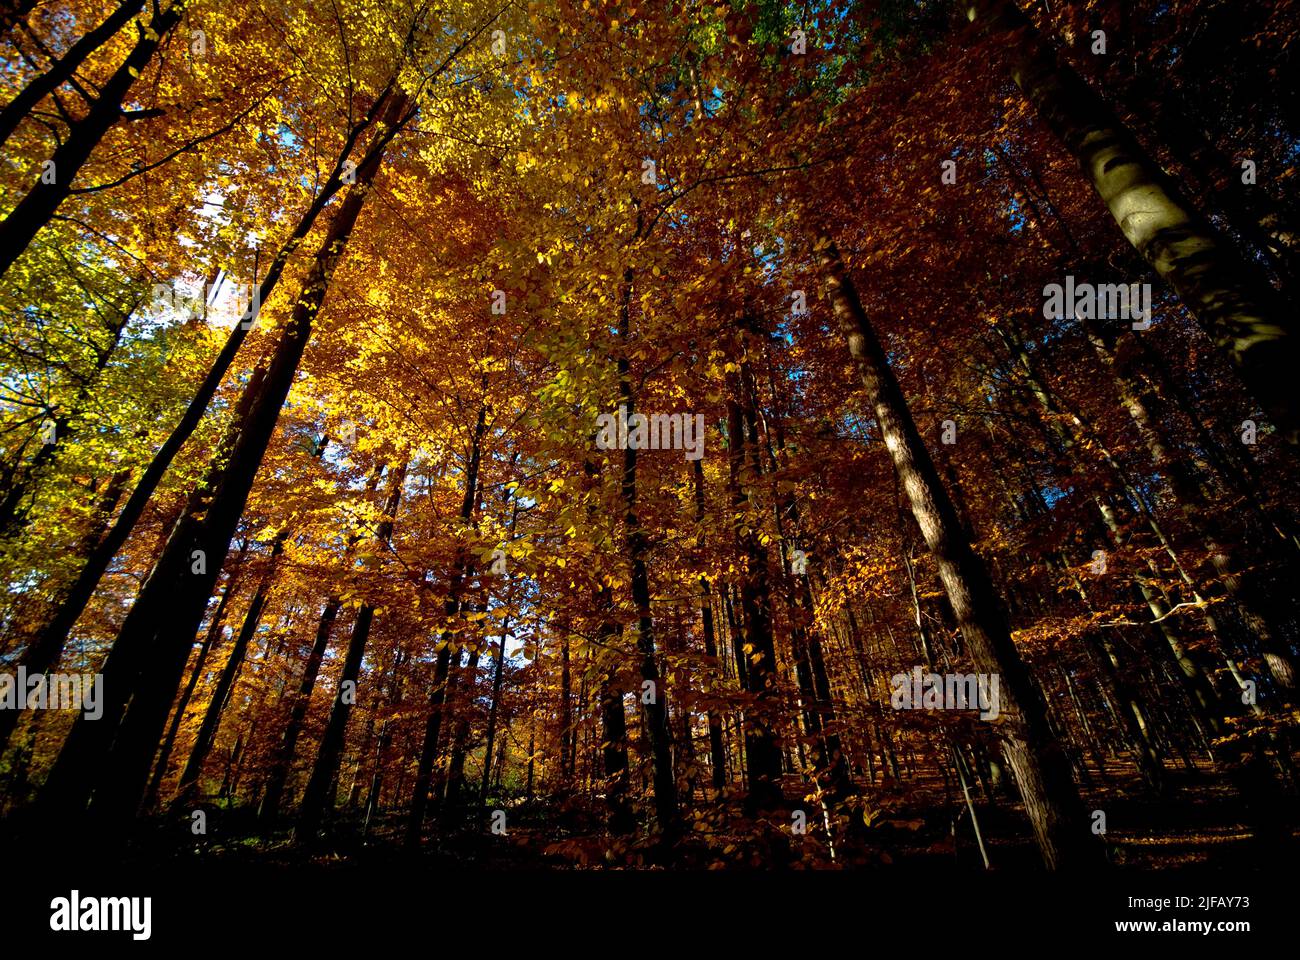 Autumn in a forest in southern Germany. Stock Photo